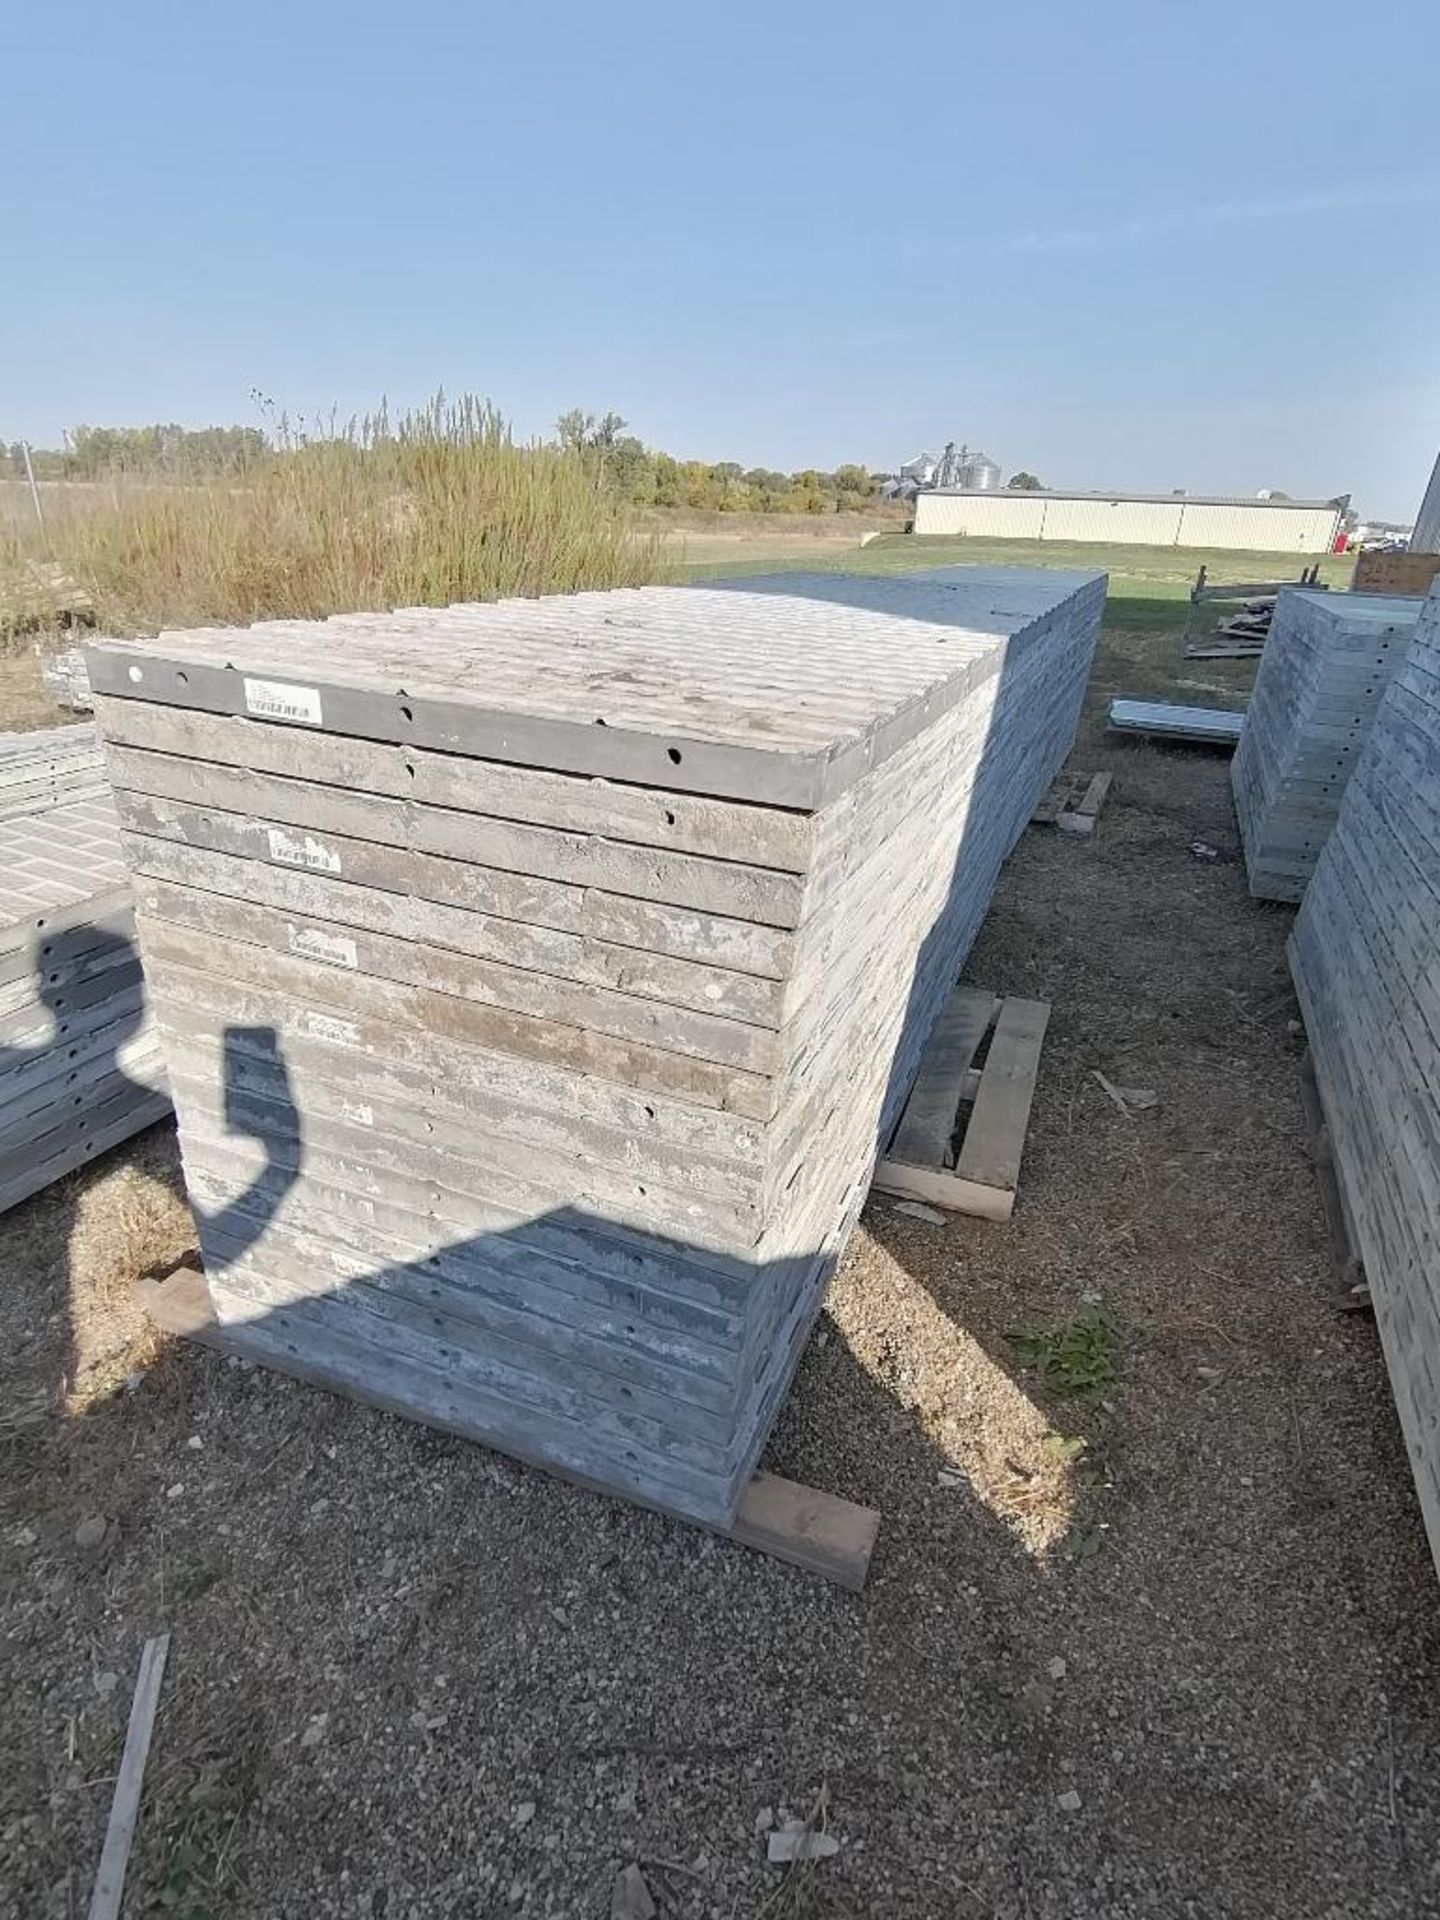 (19) 36" x 9' Precise Textured Brick Aluminum Concrete Forms 6-12 Hole Pattern. Located in Woodbine, - Image 4 of 7